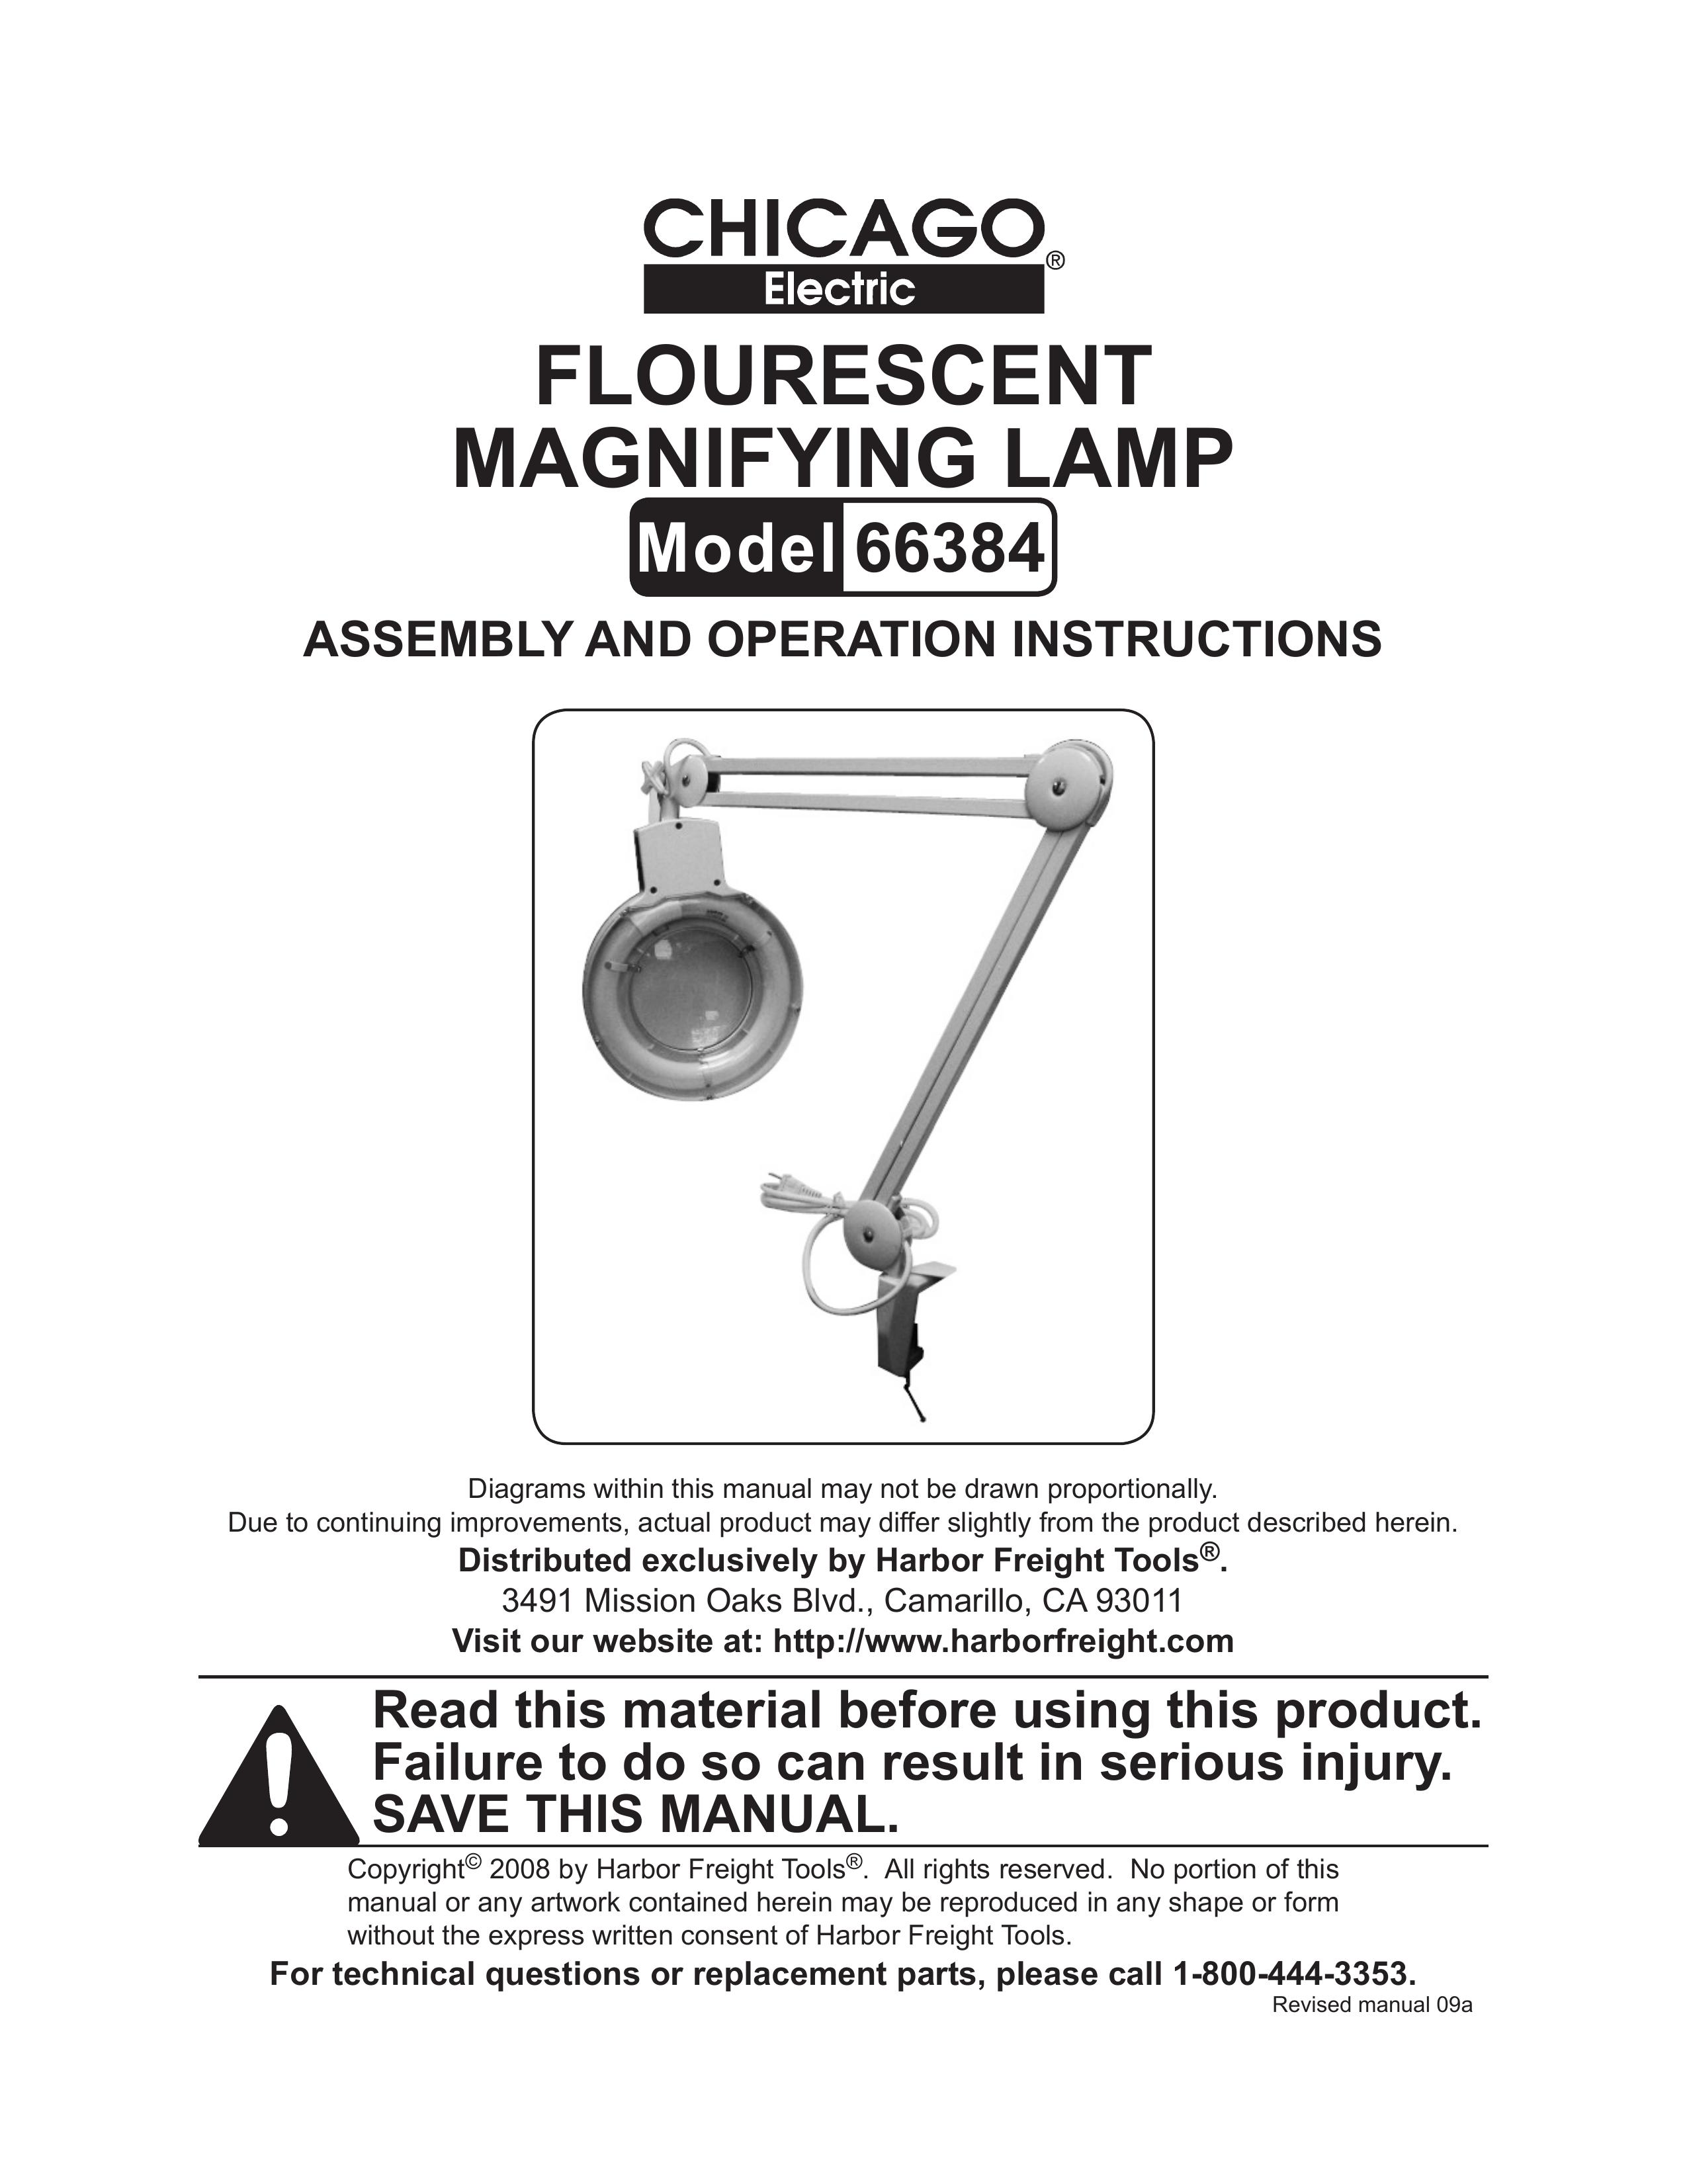 Chicago Electric 66384 Microscope & Magnifier User Manual